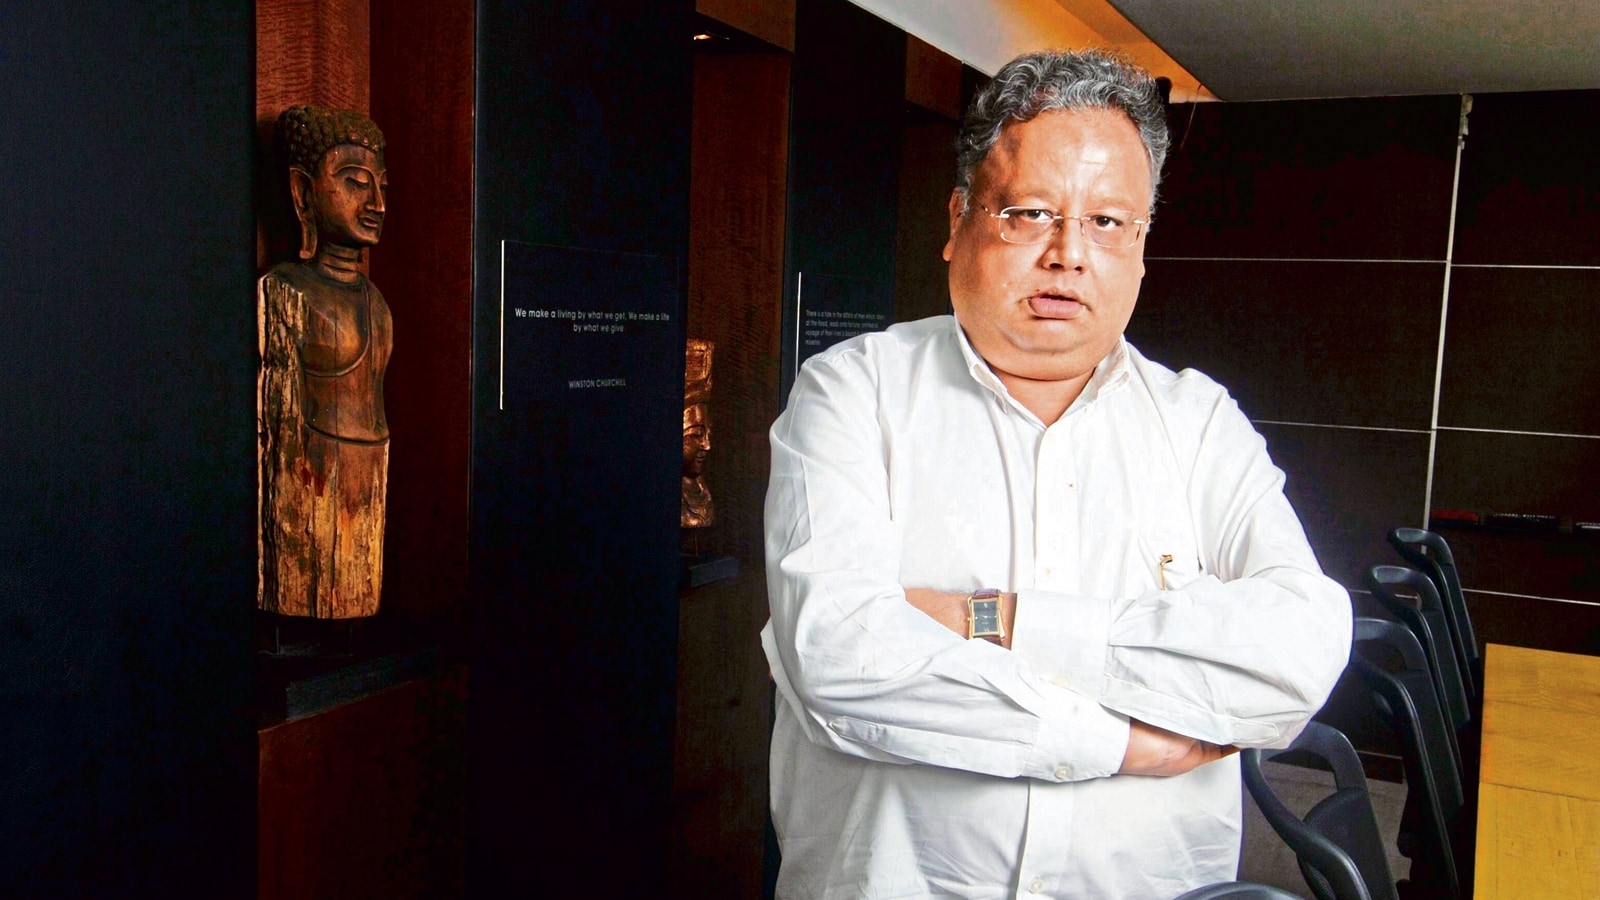 ‘Inspired an entire generation’: World of business on Jhunjhunwala’s death